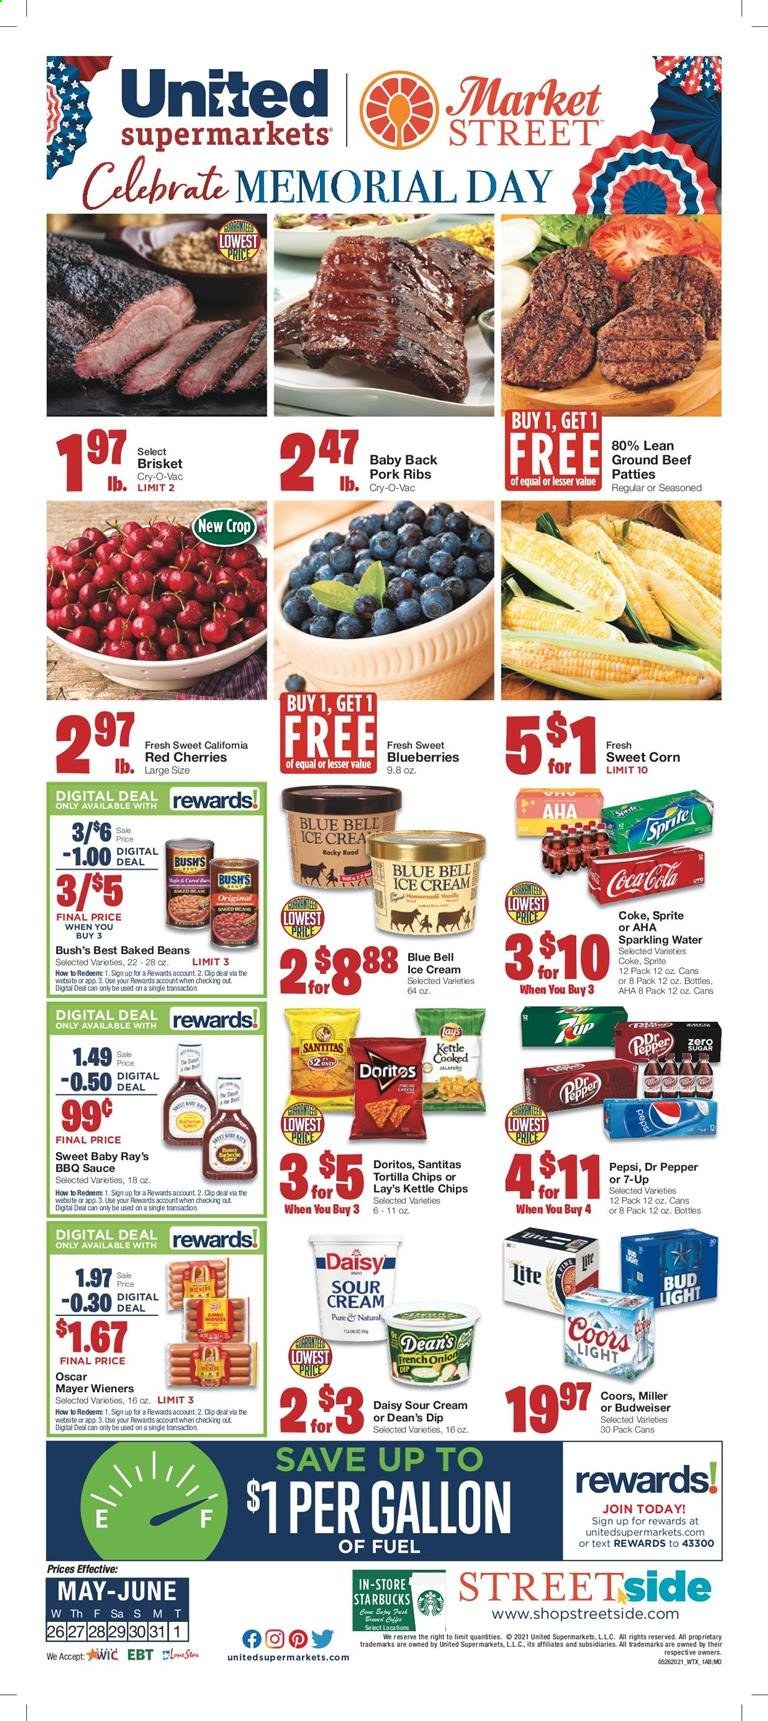 thumbnail - United Supermarkets Flyer - 05/26/2021 - 06/01/2021 - Sales products - Budweiser, Coors, beans, corn, sweet corn, blueberries, cherries, beef meat, ground beef, pork meat, pork ribs, pork back ribs, sauce, Oscar Mayer, sour cream, dip, ice cream, Blue Bell, Doritos, tortilla chips, chips, Lay’s, baked beans, BBQ sauce, Coca-Cola, Sprite, Pepsi, Dr. Pepper, 7UP, sparkling water, Starbucks, L'Or, beer, Bud Light, Miller. Page 1.